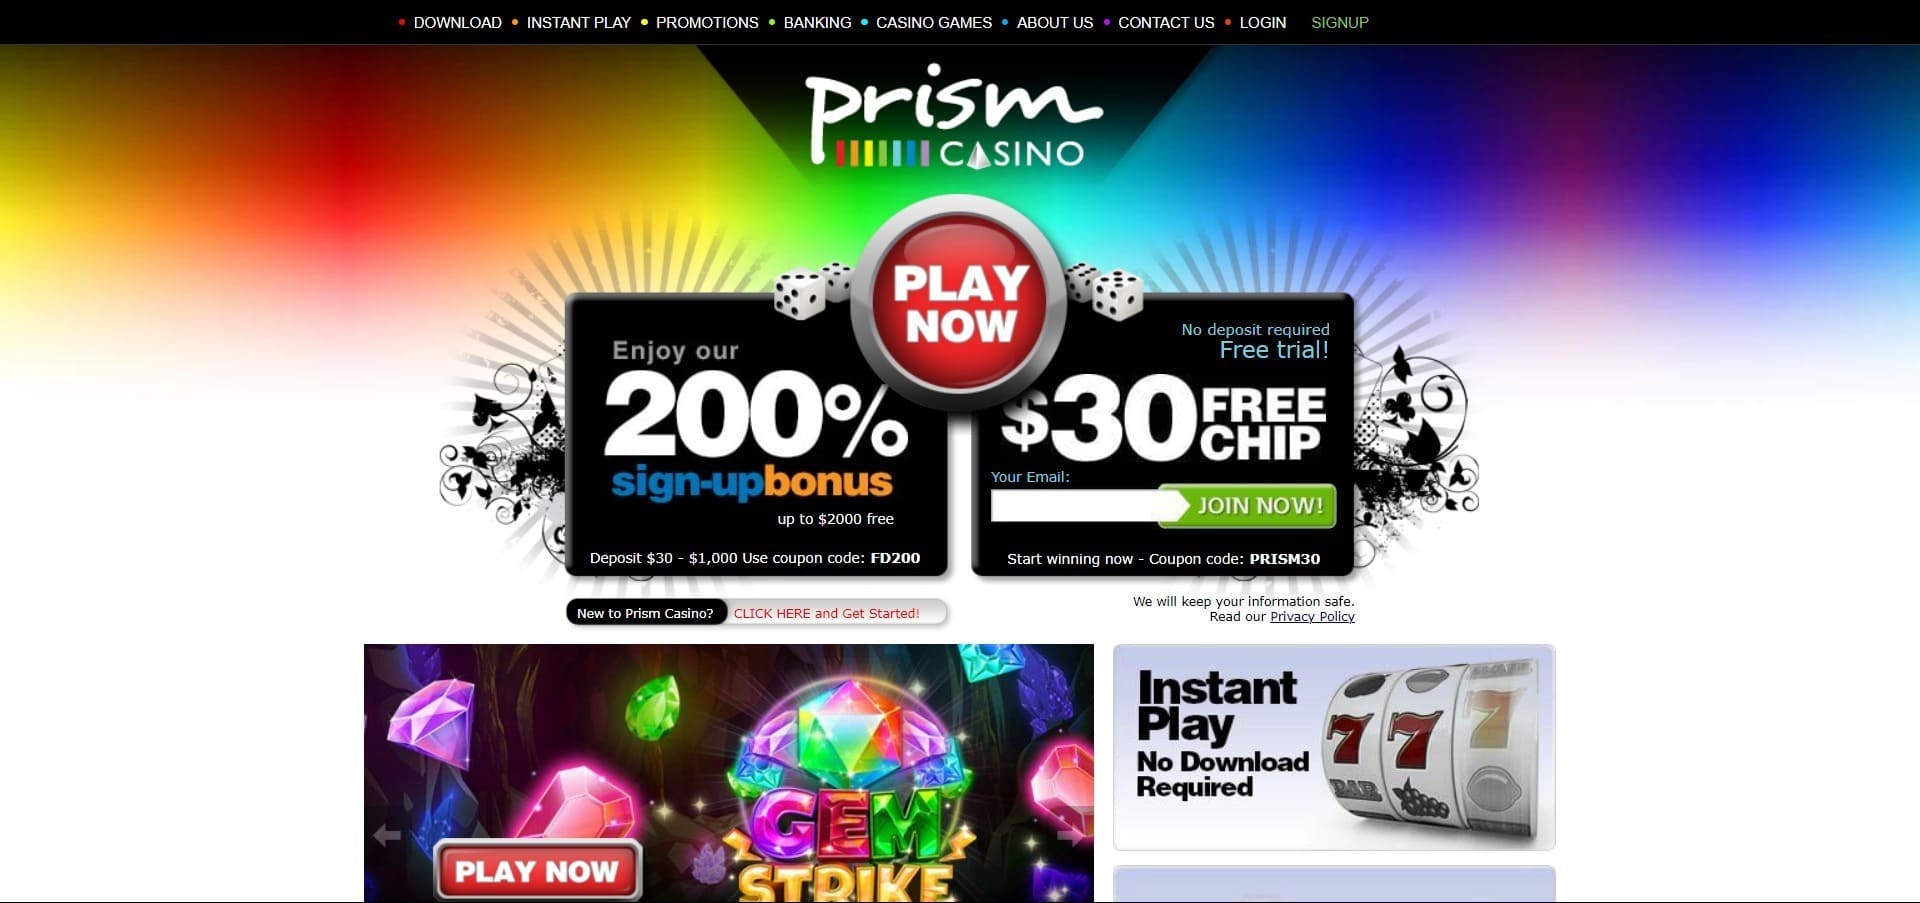 Official website of the Prism